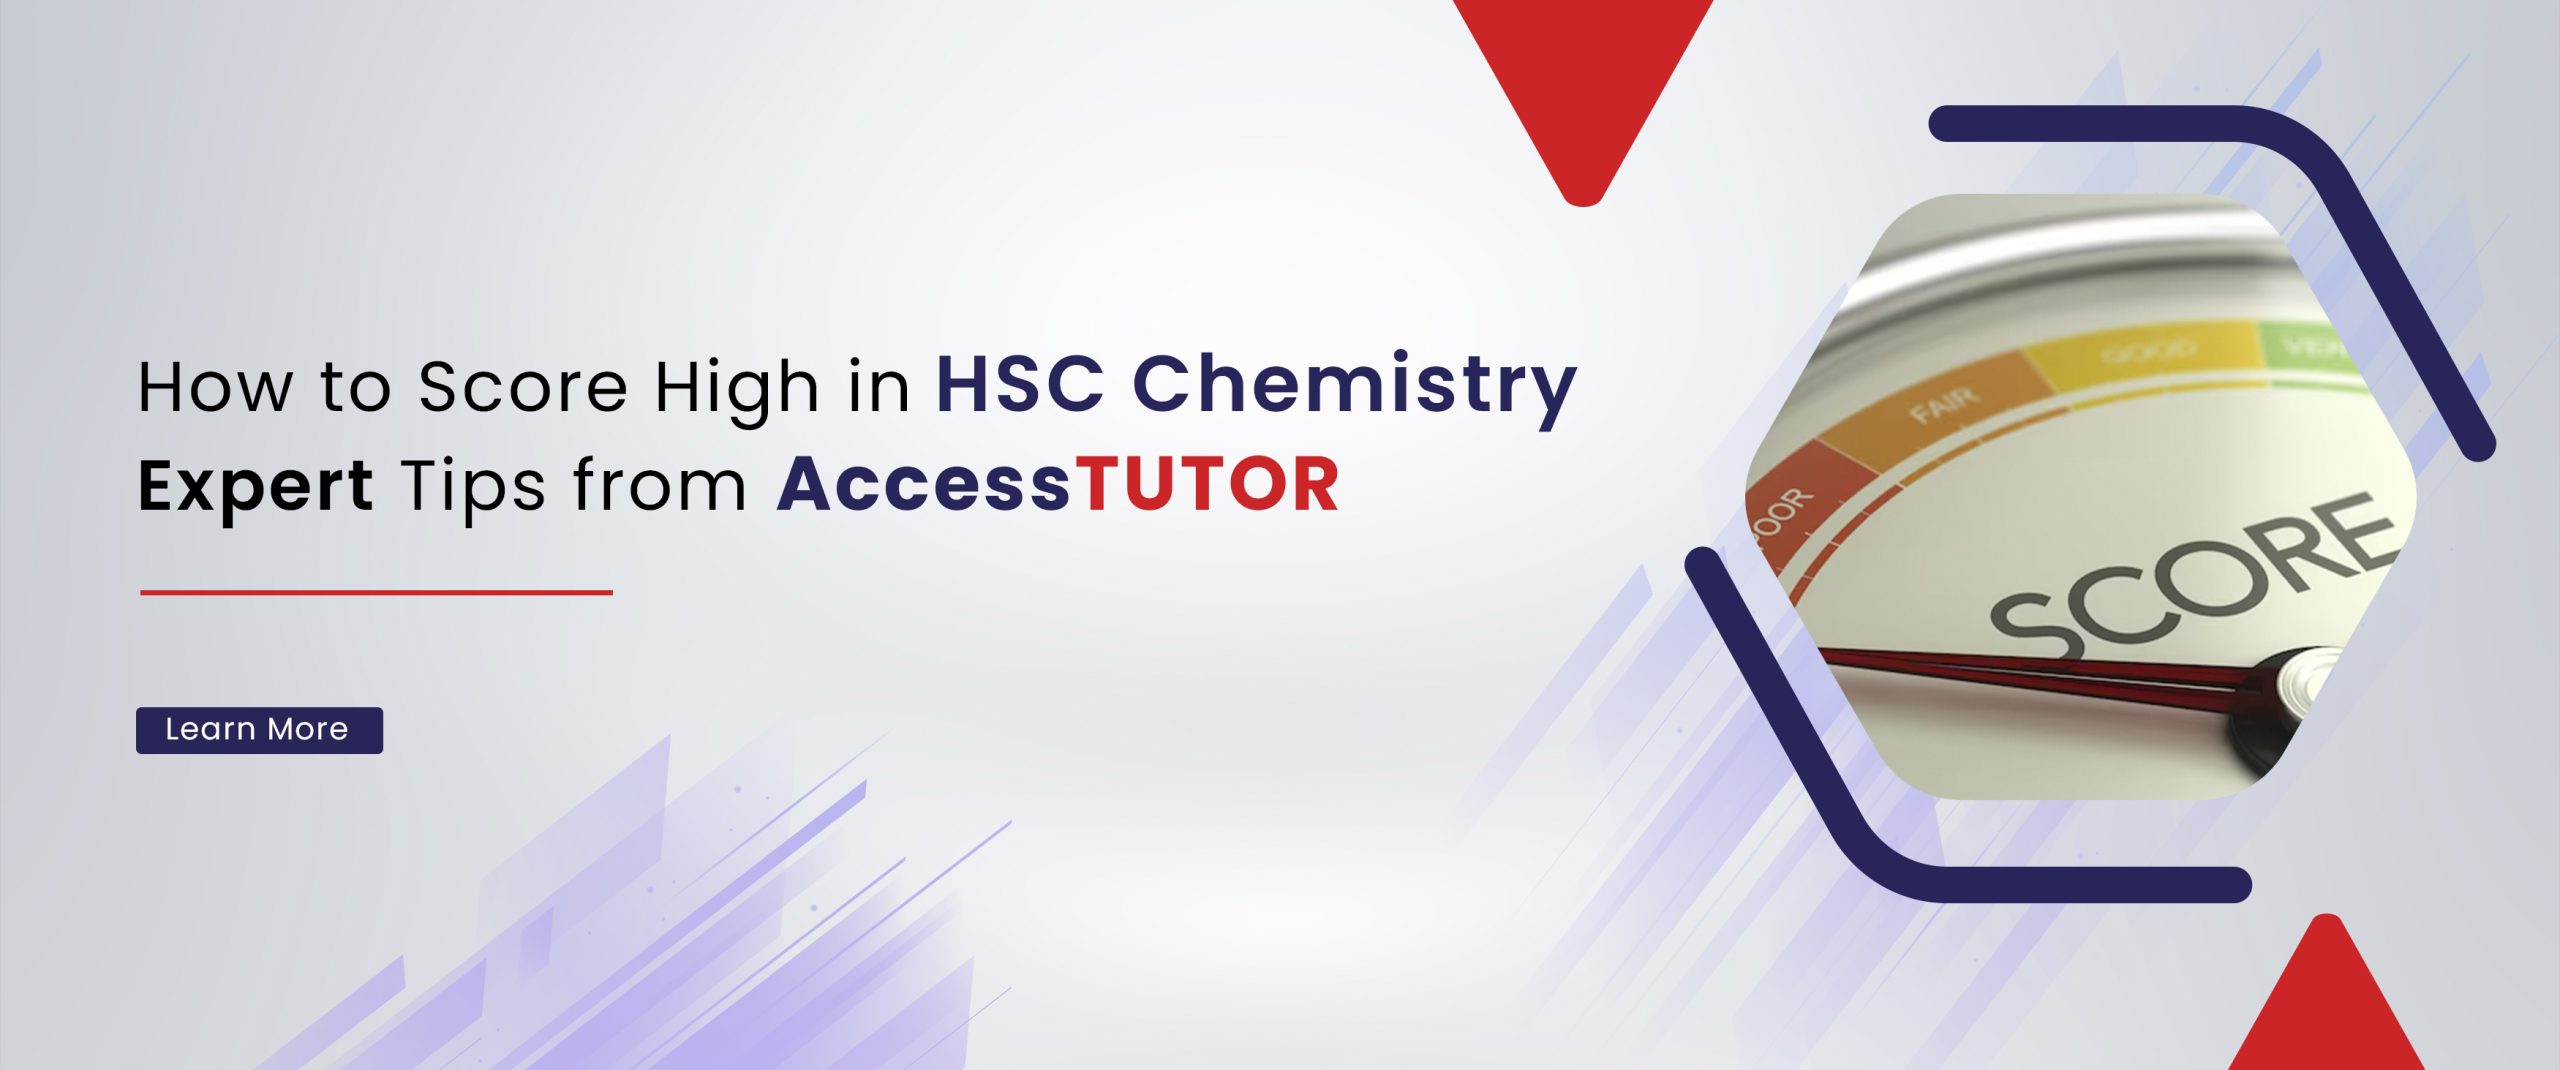 How to Score High in HSC Chemistry